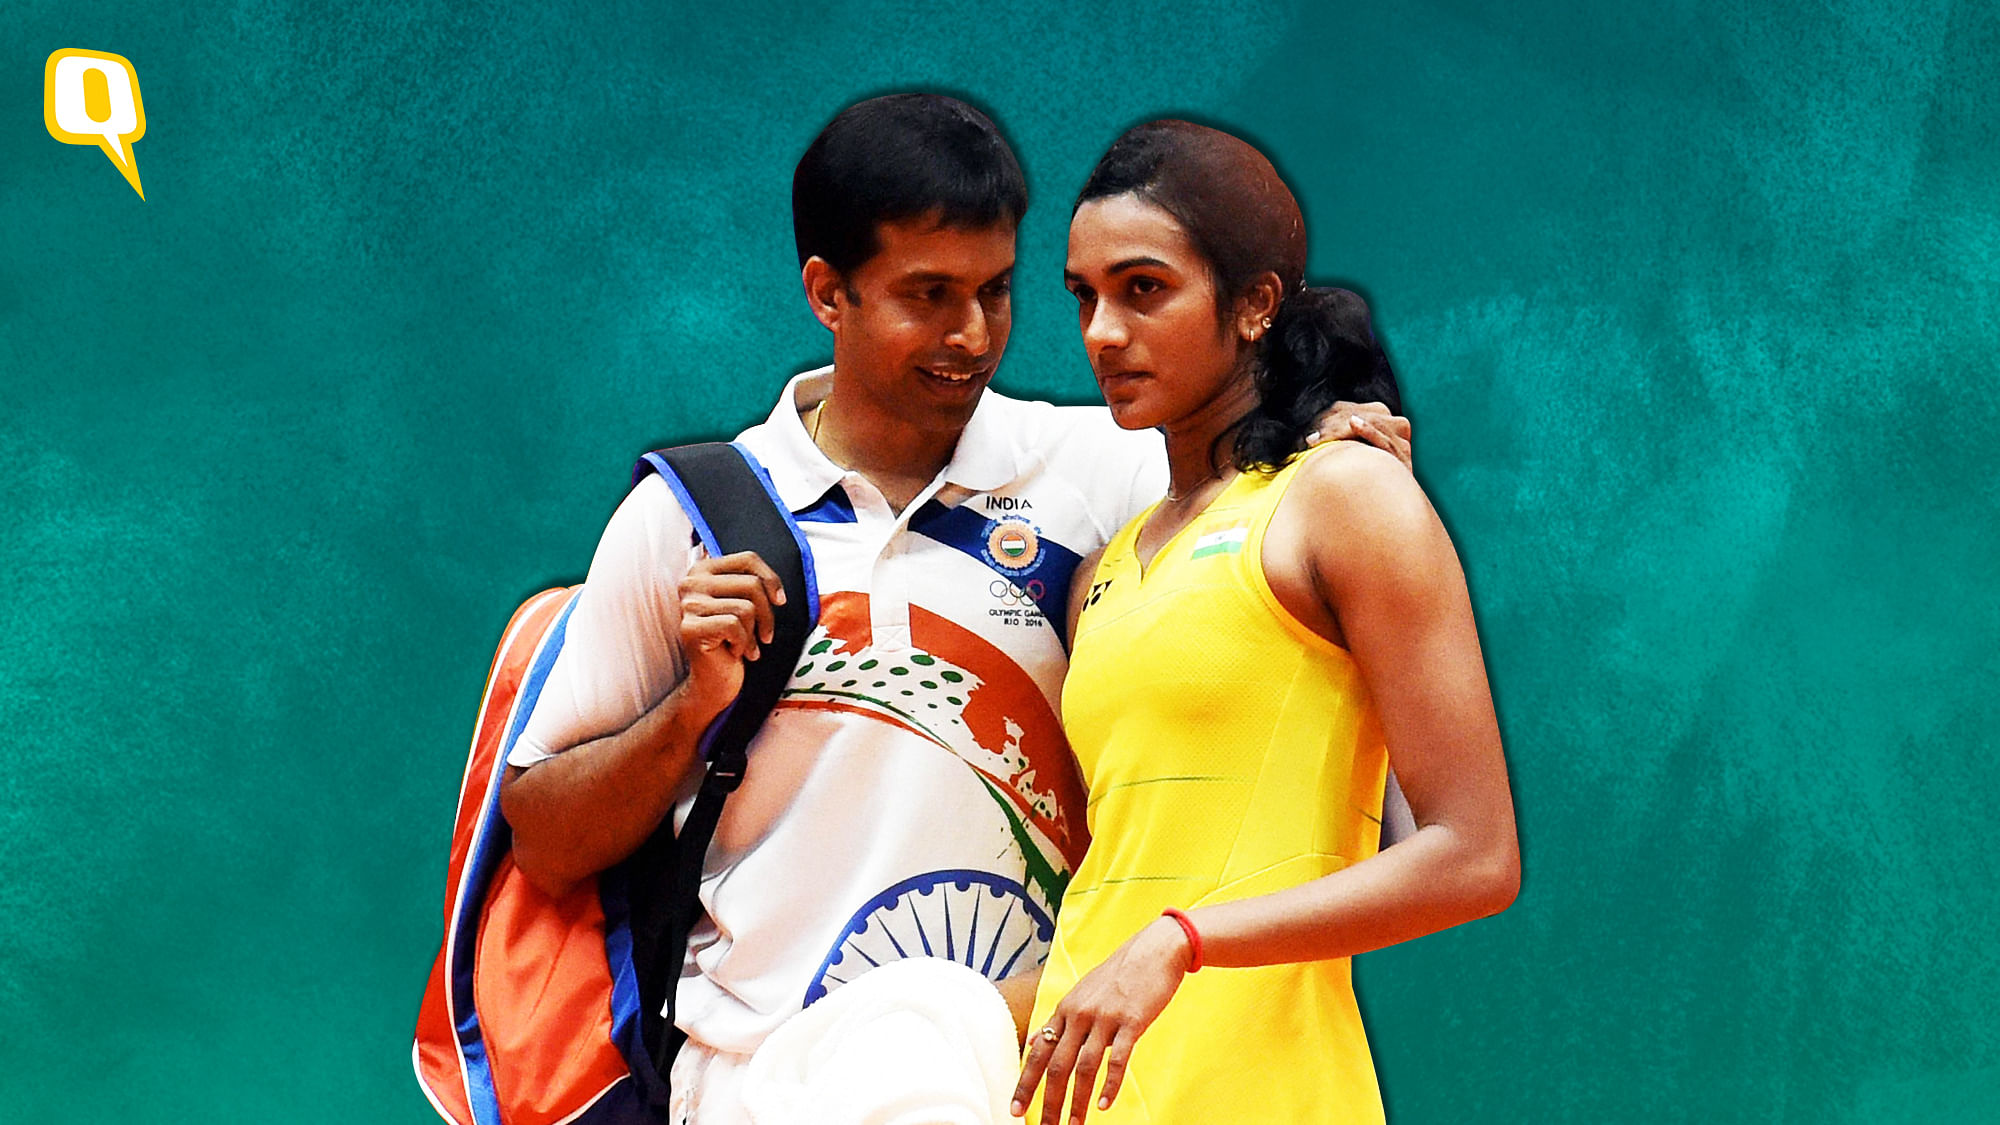 Indian badminton has gone online with chief national coach Pullela Gopichand handing out tips through videos to the country’s top shuttlers.